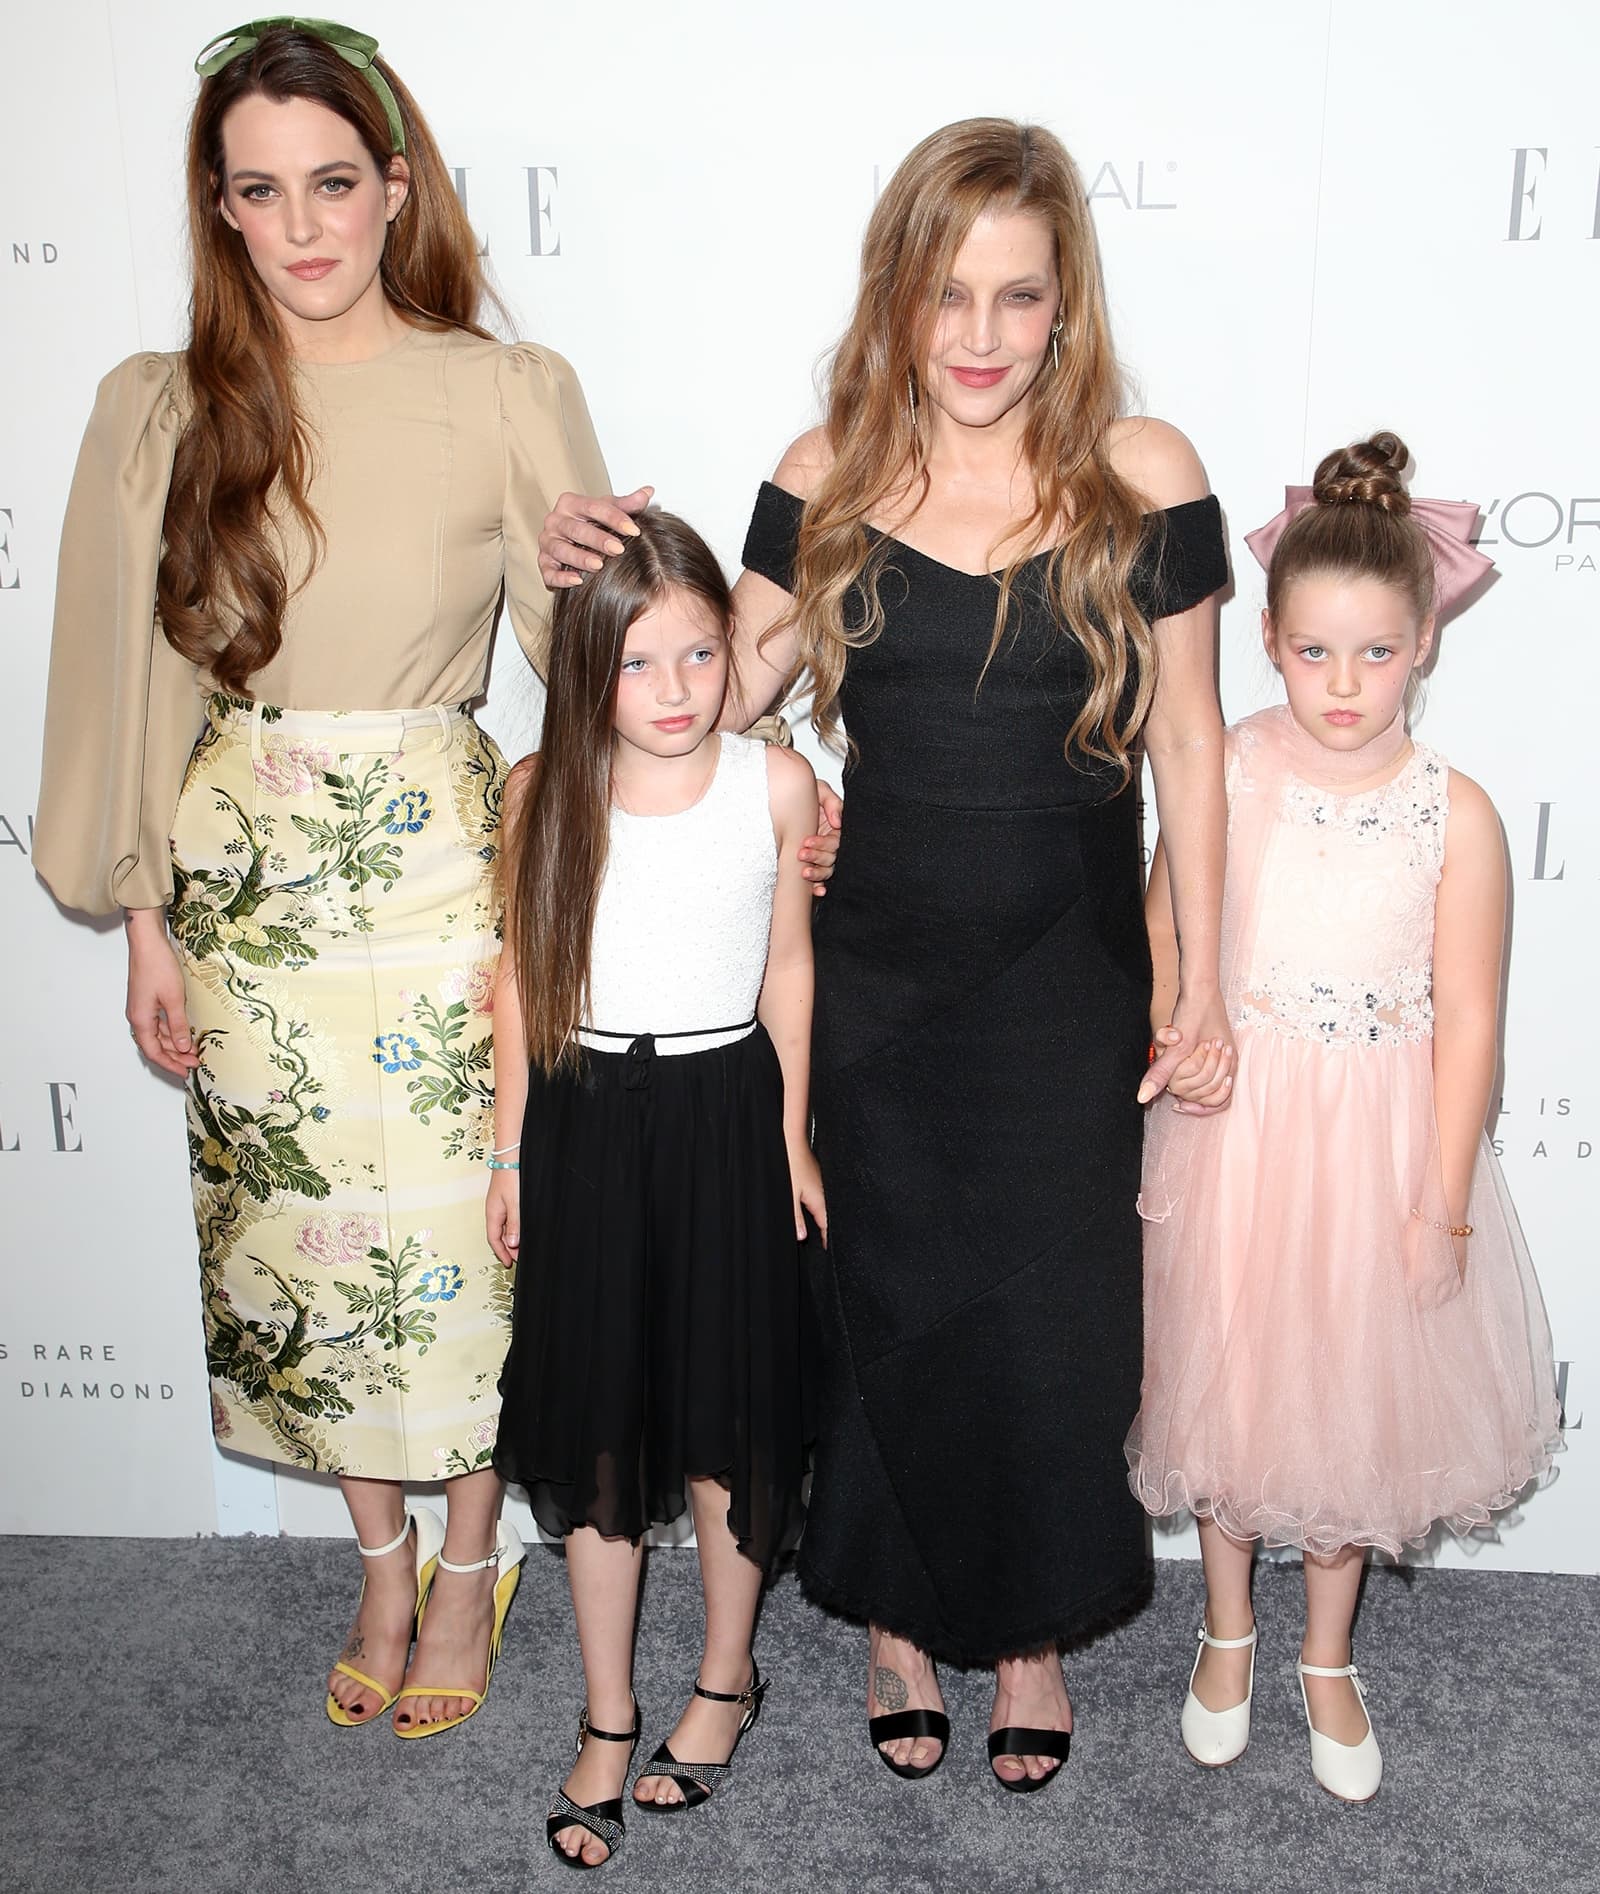 Lisa Marie Presley posing with Riley Keough and her twin girls Finley Aaron Love Lockwood and Harper Vivienne Ann Lockwood at the 2017 ELLE Women in Hollywood Awards